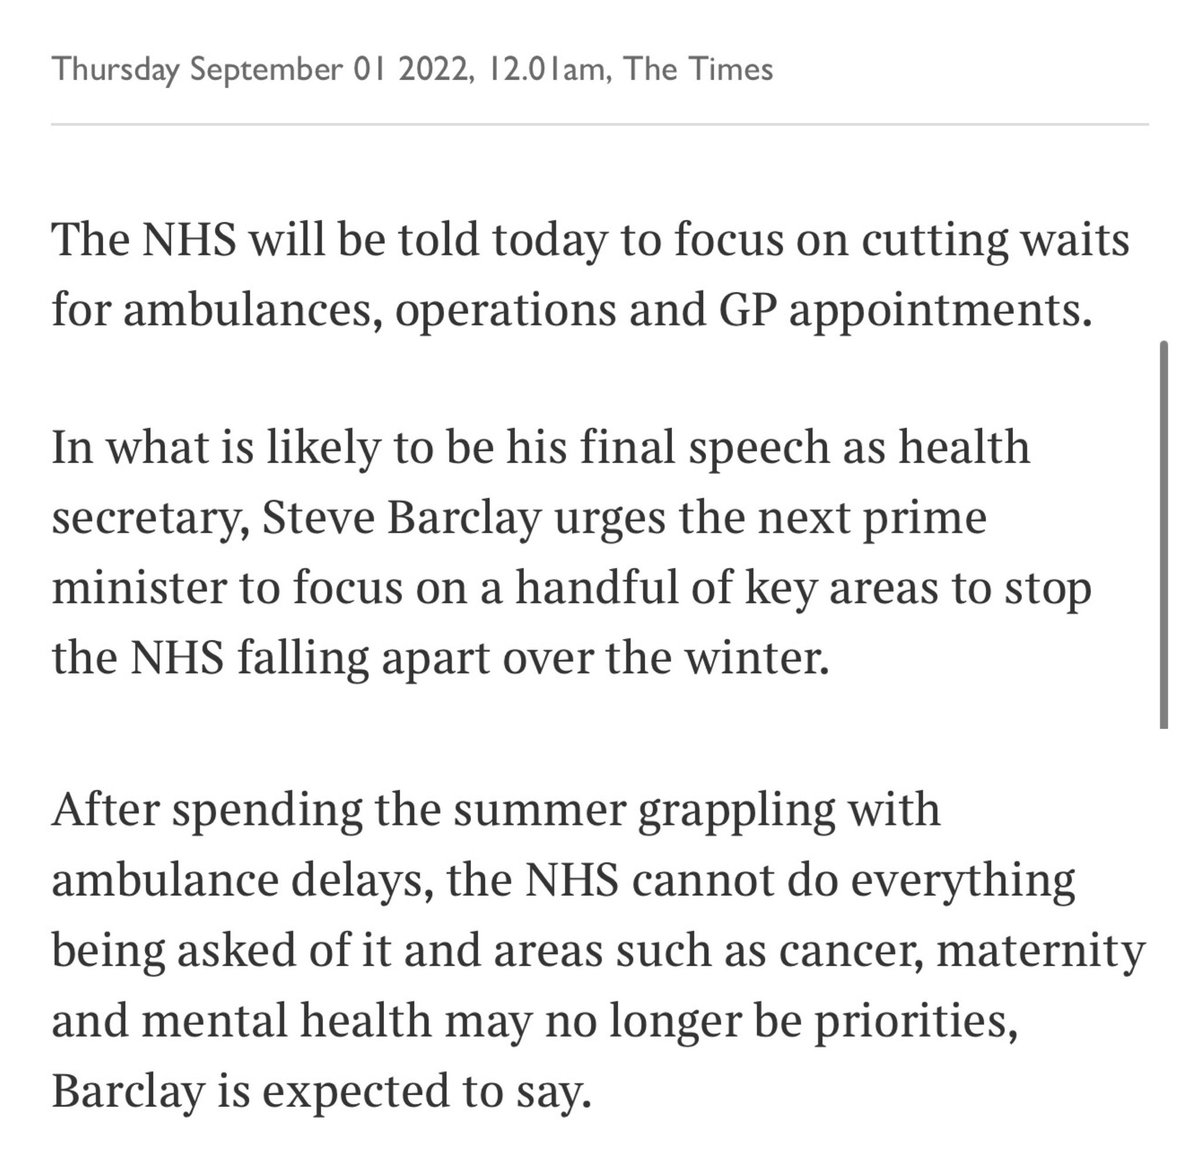 Disheartening to read that “mental health may no longer be [a] priorit[y]” for the NHS under this health secretary, in today’s @thetimes. Not a very joined-up view of patient care, waits or ambulance delays? #parityofesteem #nohealthwithoutmentalhealth